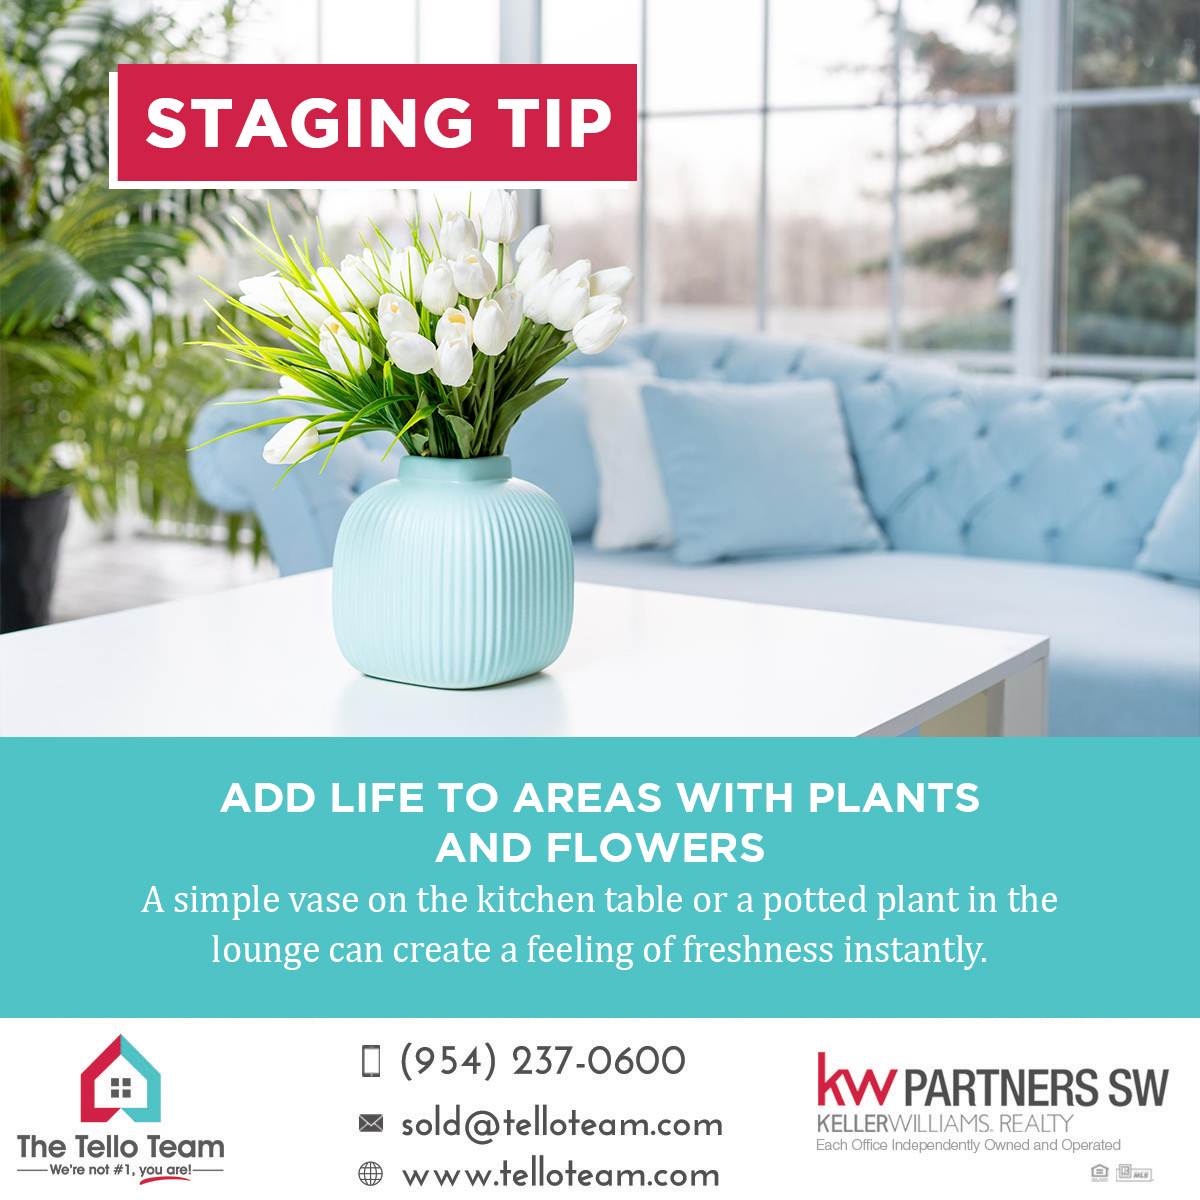 #StagingTip Add life to areas with plants and flowers

Looking to sell your home? 📲+1 954-237-0600

#stagingsells #stagingtips #stagetosell #realestatebroker #realestatemiami #realestateflorida #floridarealtor #floridarealtors #browardcountyrealestate #browardcountyrealtor